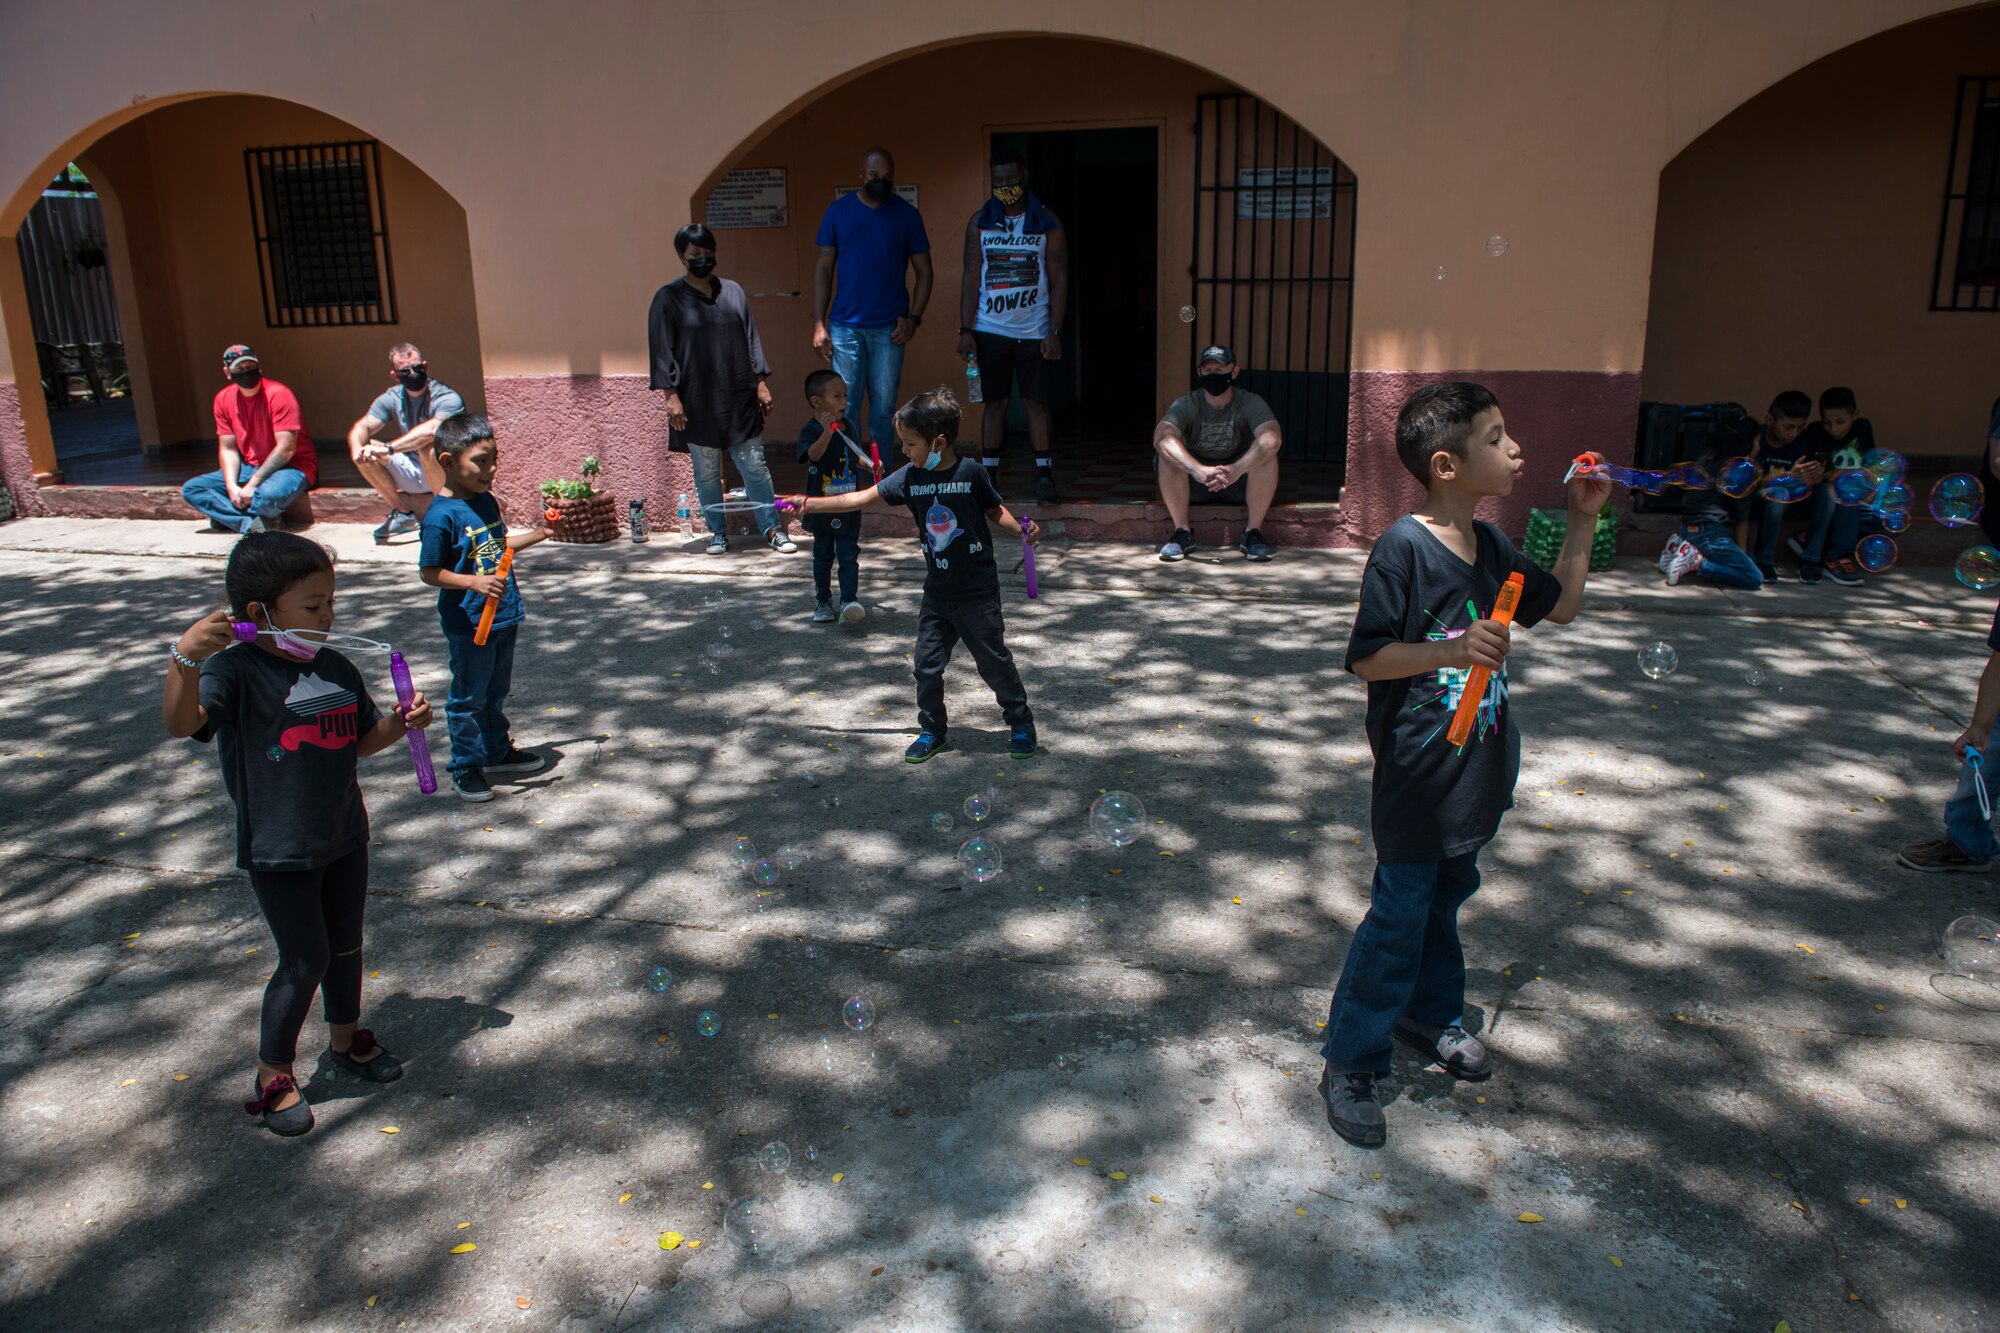 Children at the Children of Love Foundation Orphanage play with bubbles donated by U.S. Airmen with the 612th Air Base Squadron, Soto Cano Air Base, Honduras, during a visit in La Paz, Honduras, April 25, 2021. Members with the 612th ABS donated clothing, shoes, underwear, and towels in a backpack for each child, as well as toys, soap, toothpaste, and school supplies that were delivered in large boxes to 18 orphans who live at the orphanage. (U.S. Air Force photo by Tech. Sgt. Marleah Cabano)